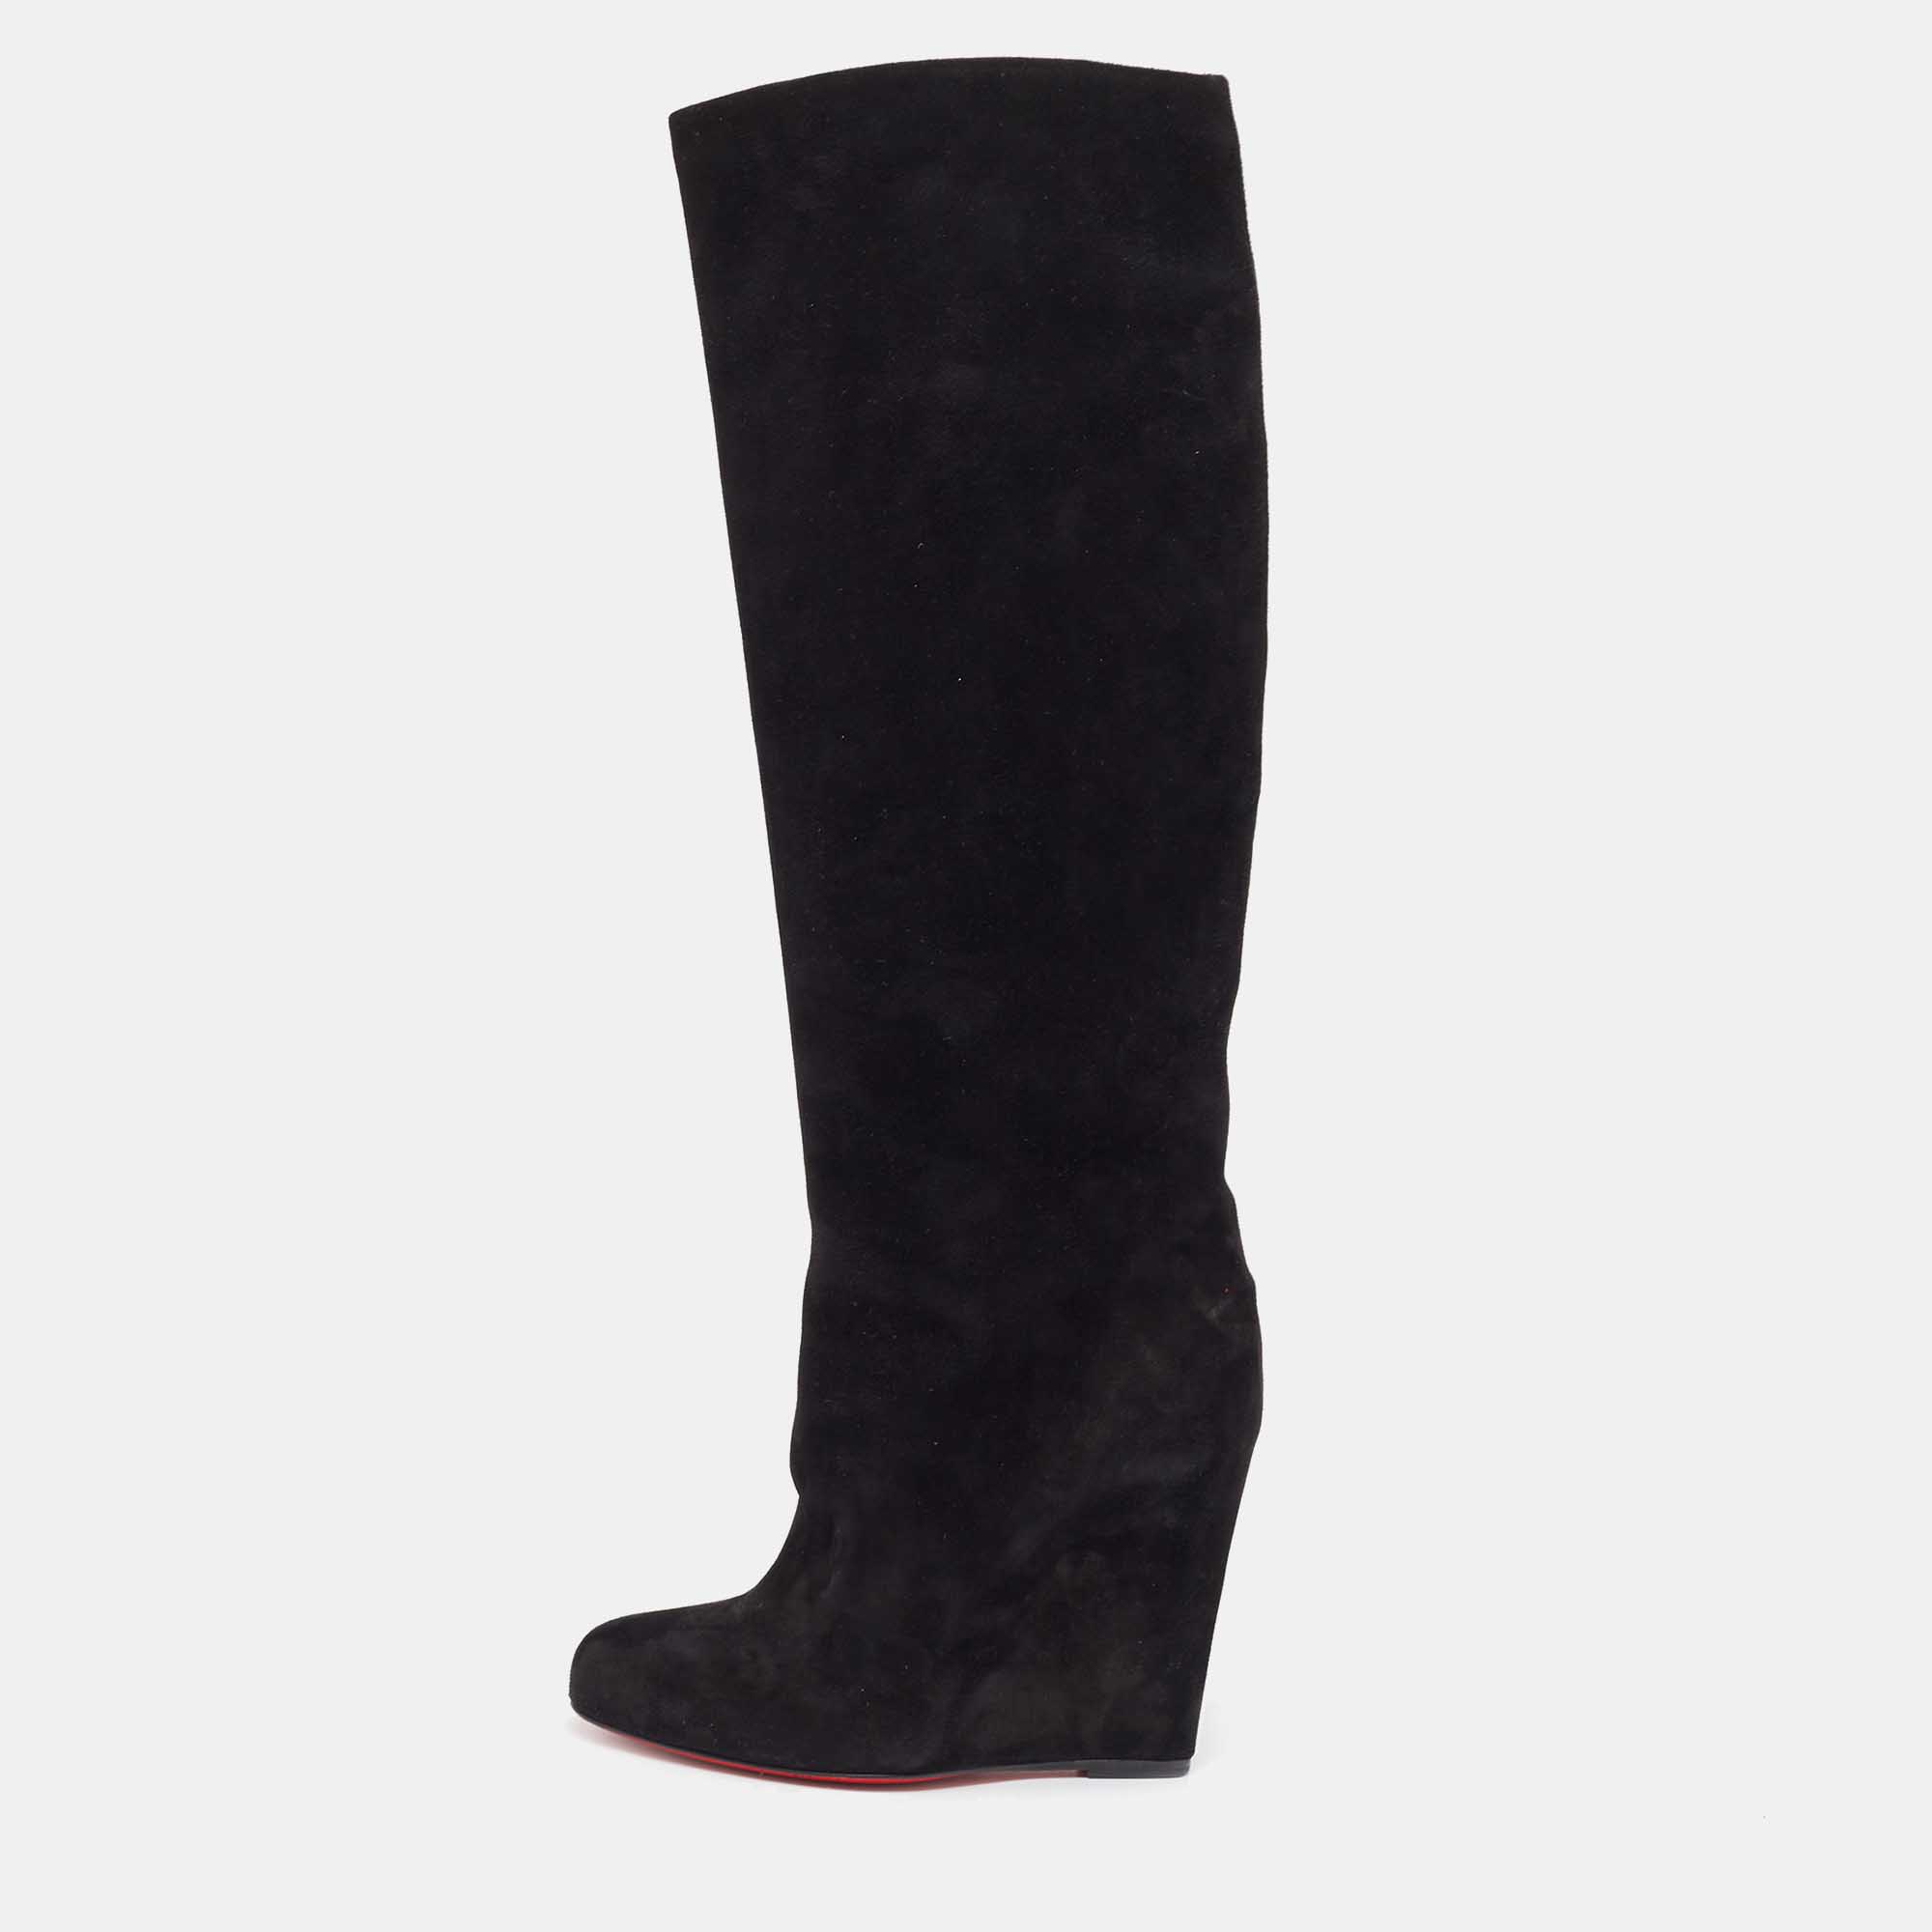 Pre-owned Christian Louboutin Black Suede Melissa Botta Wedge Knee Boots Size 37.5